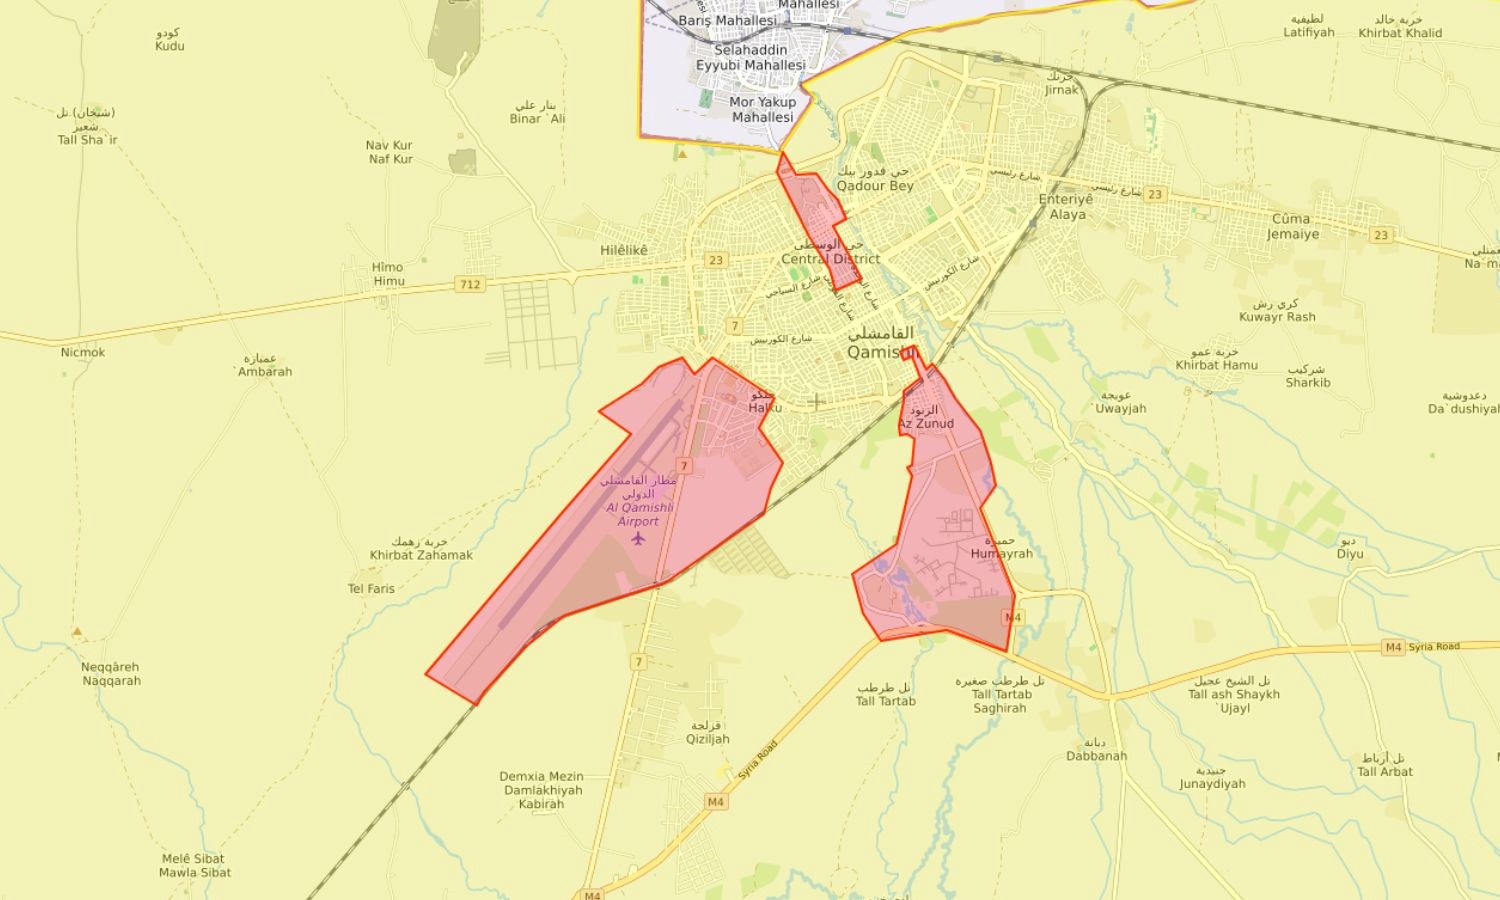 The areas controlled by the Syrian regime include the security square in Qamishli, the Nusaybin border crossing with Turkey (Top), the Qamishli Airport (L), and towns controlled by the regime south of the city (Bottom). The areas shown in yellow are where SDF is deployed.